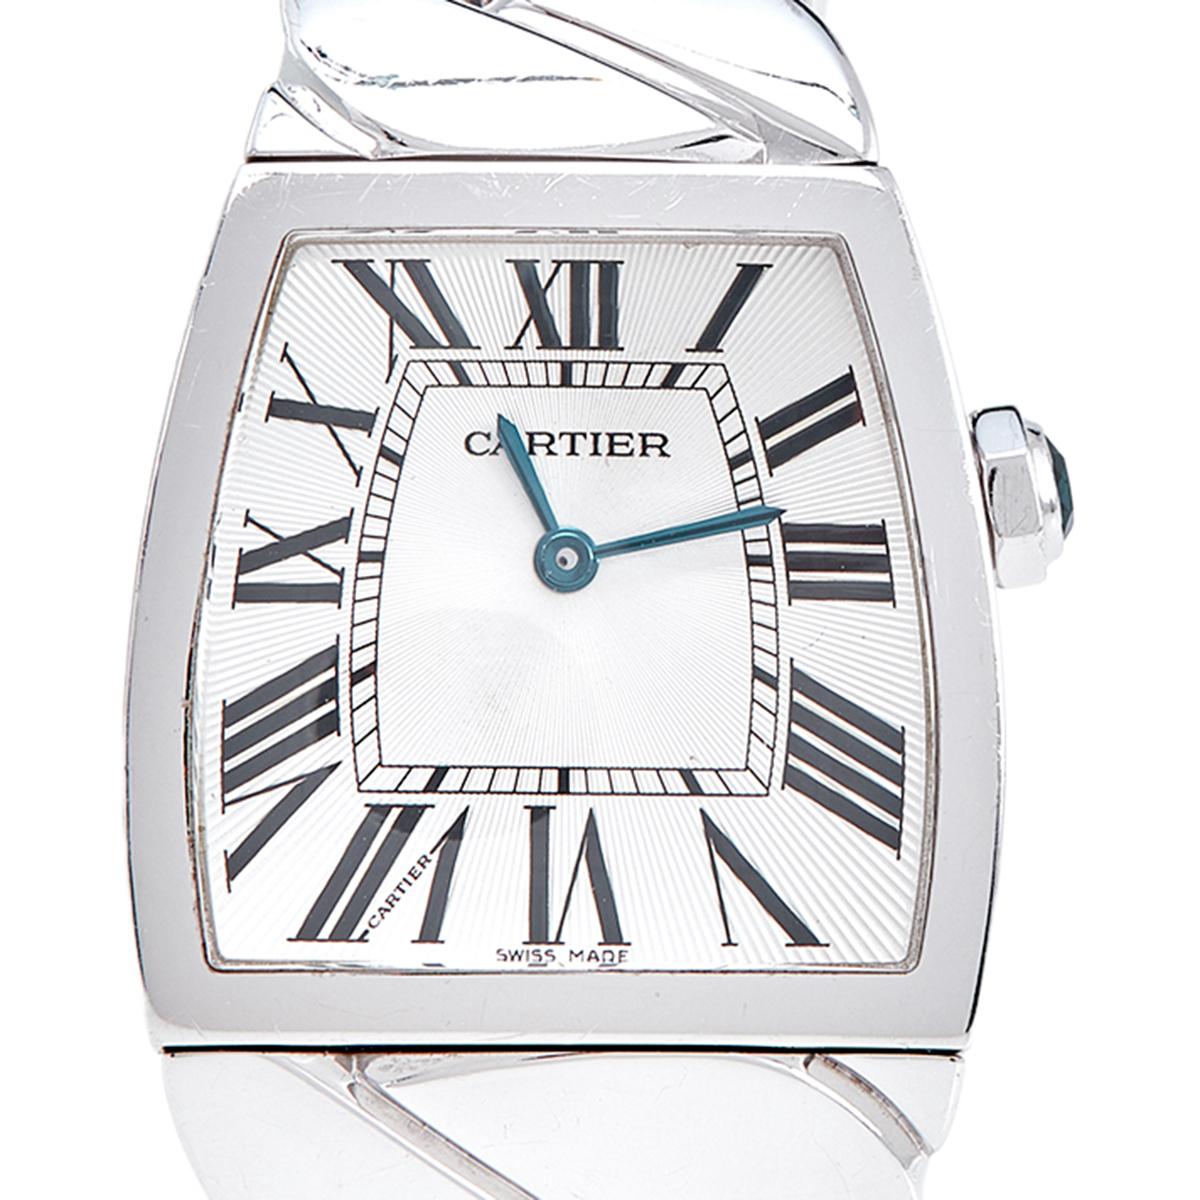 Wristwatches work as well as jewelry when accessorized right. Take a look at the beauty of this Cartier. It comes made from 18k white gold with a braid-like bracelet, fully ready to charm. The 28mm case protects the silver dial fixed with Roman